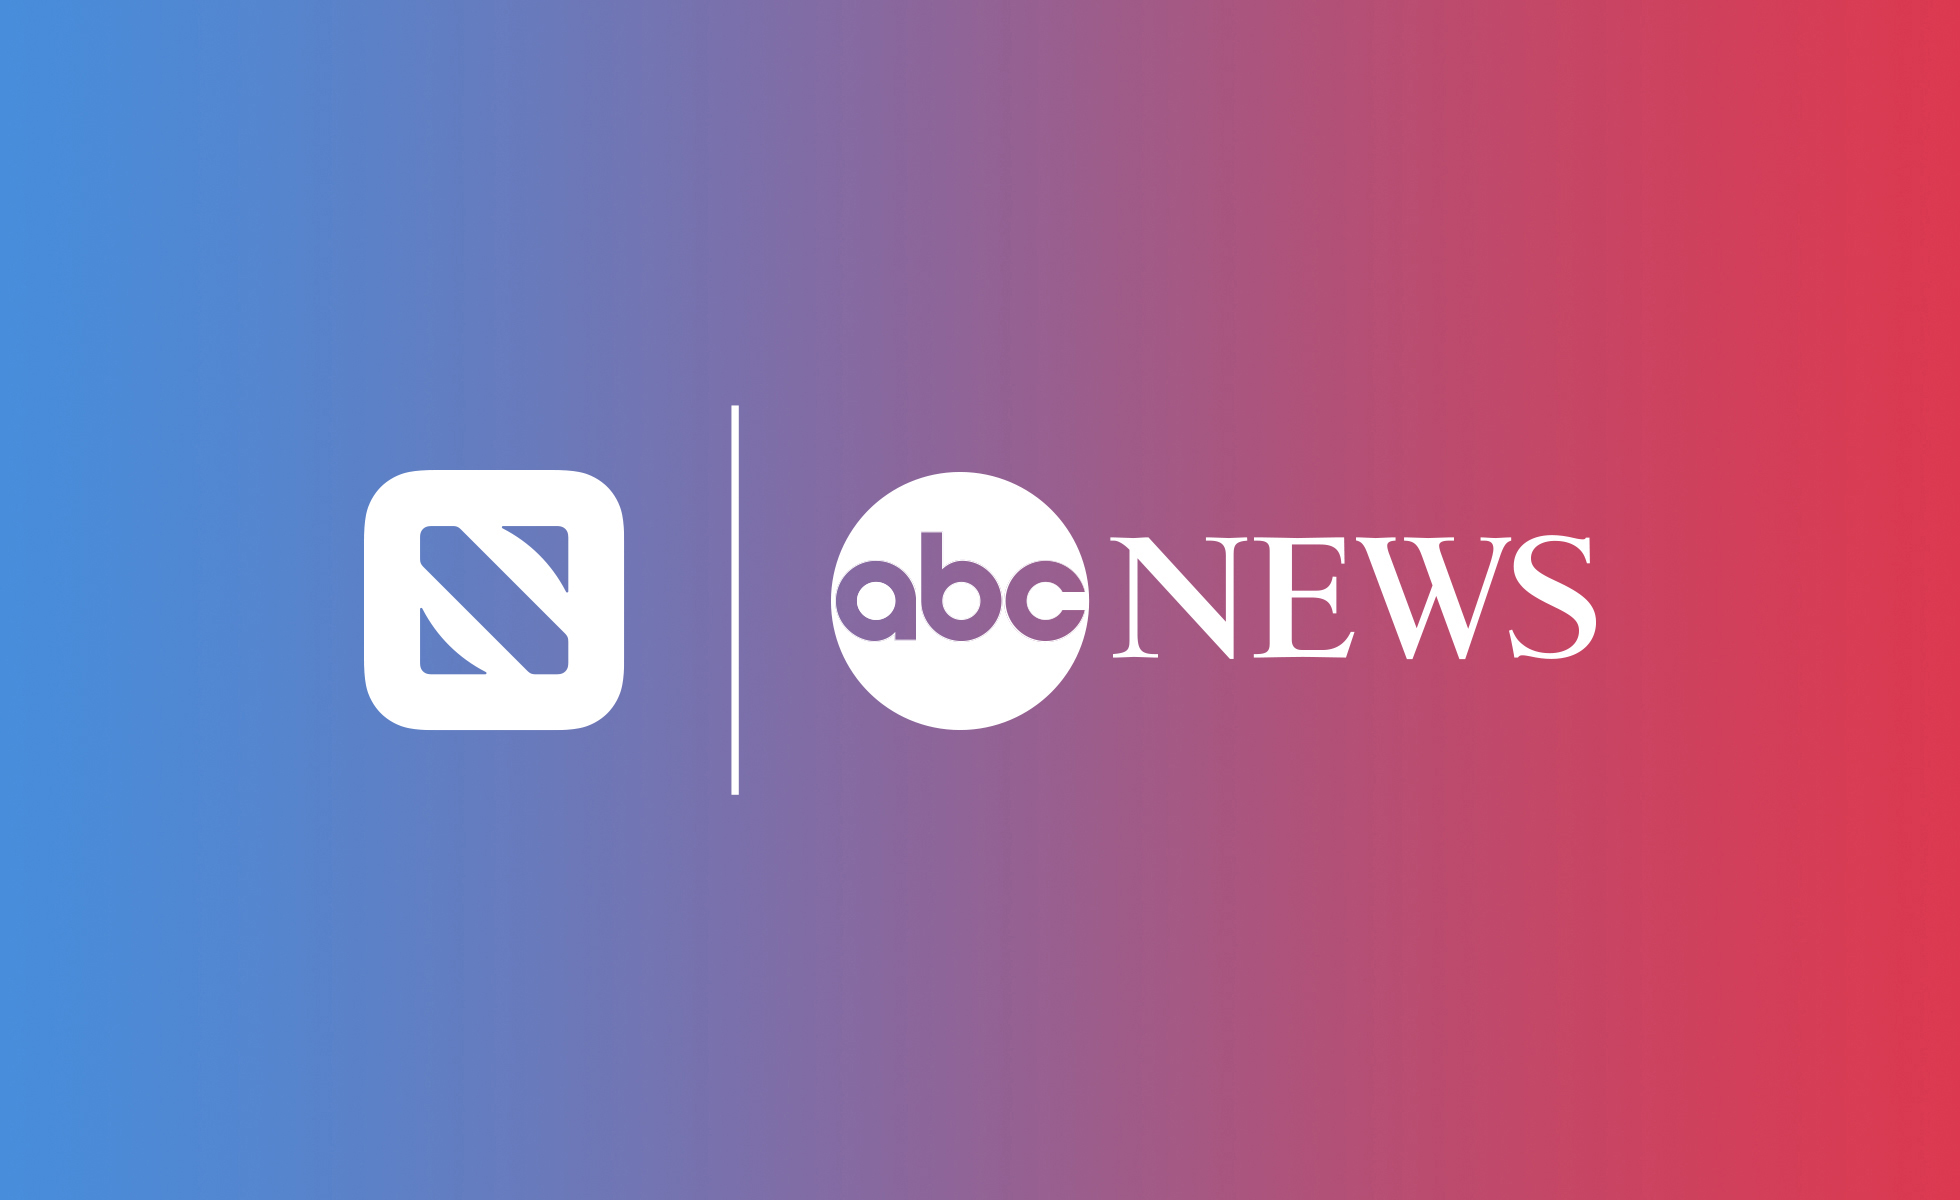 Apple partners with ABC on 2020 presidential coverage in the Apple News app